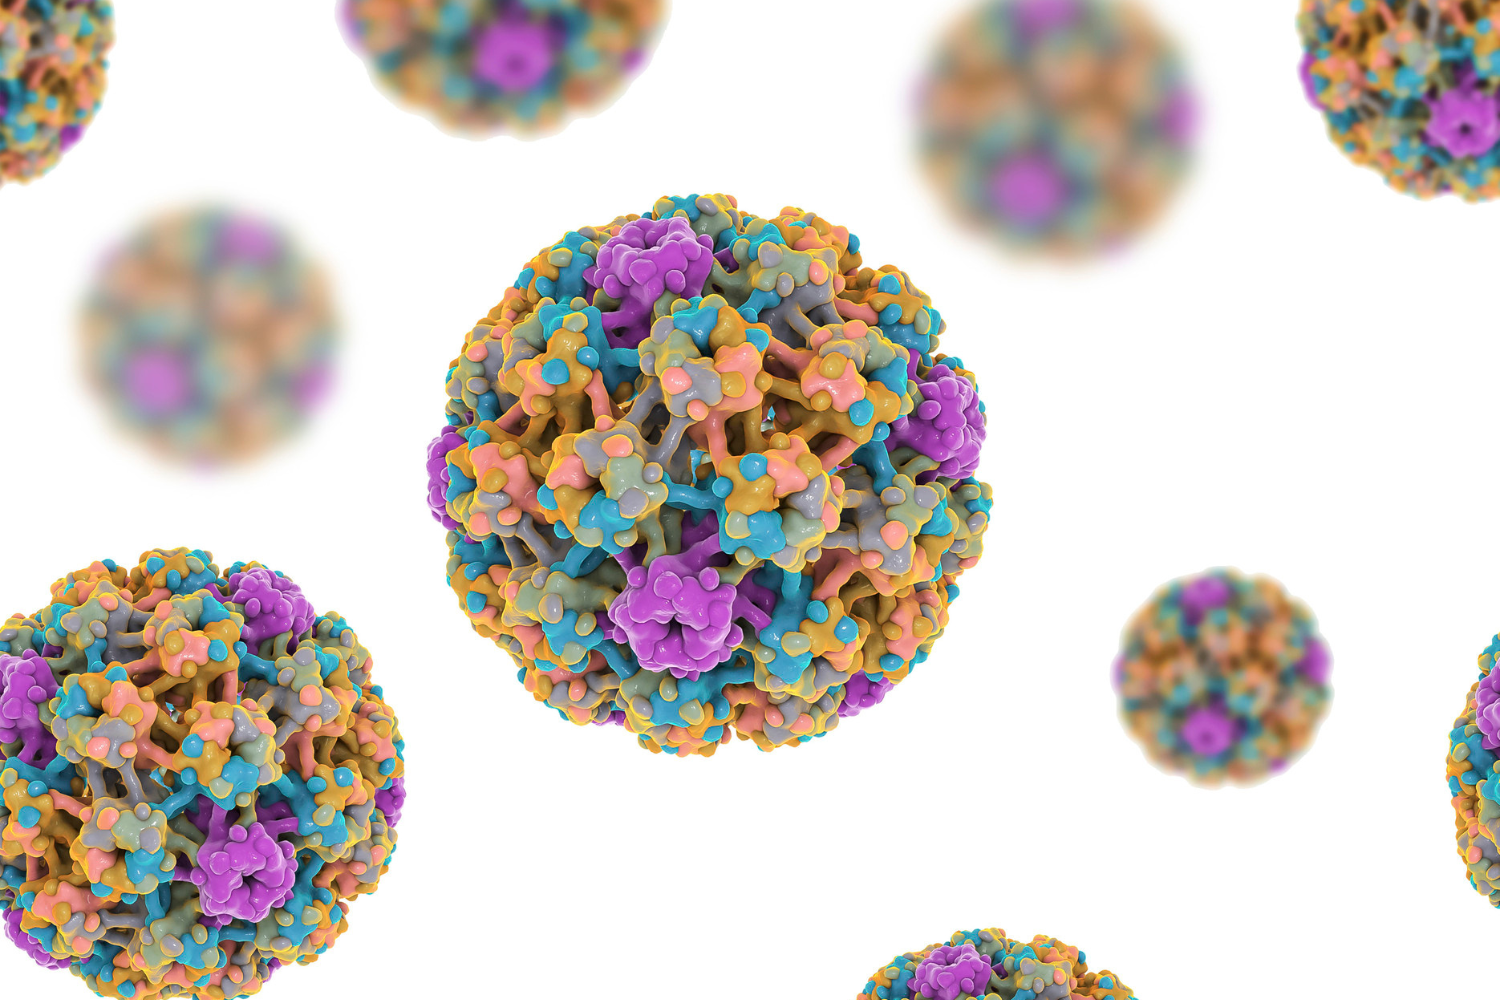 Navigating the Landscape of HPV: Understanding, Prevention, and Management